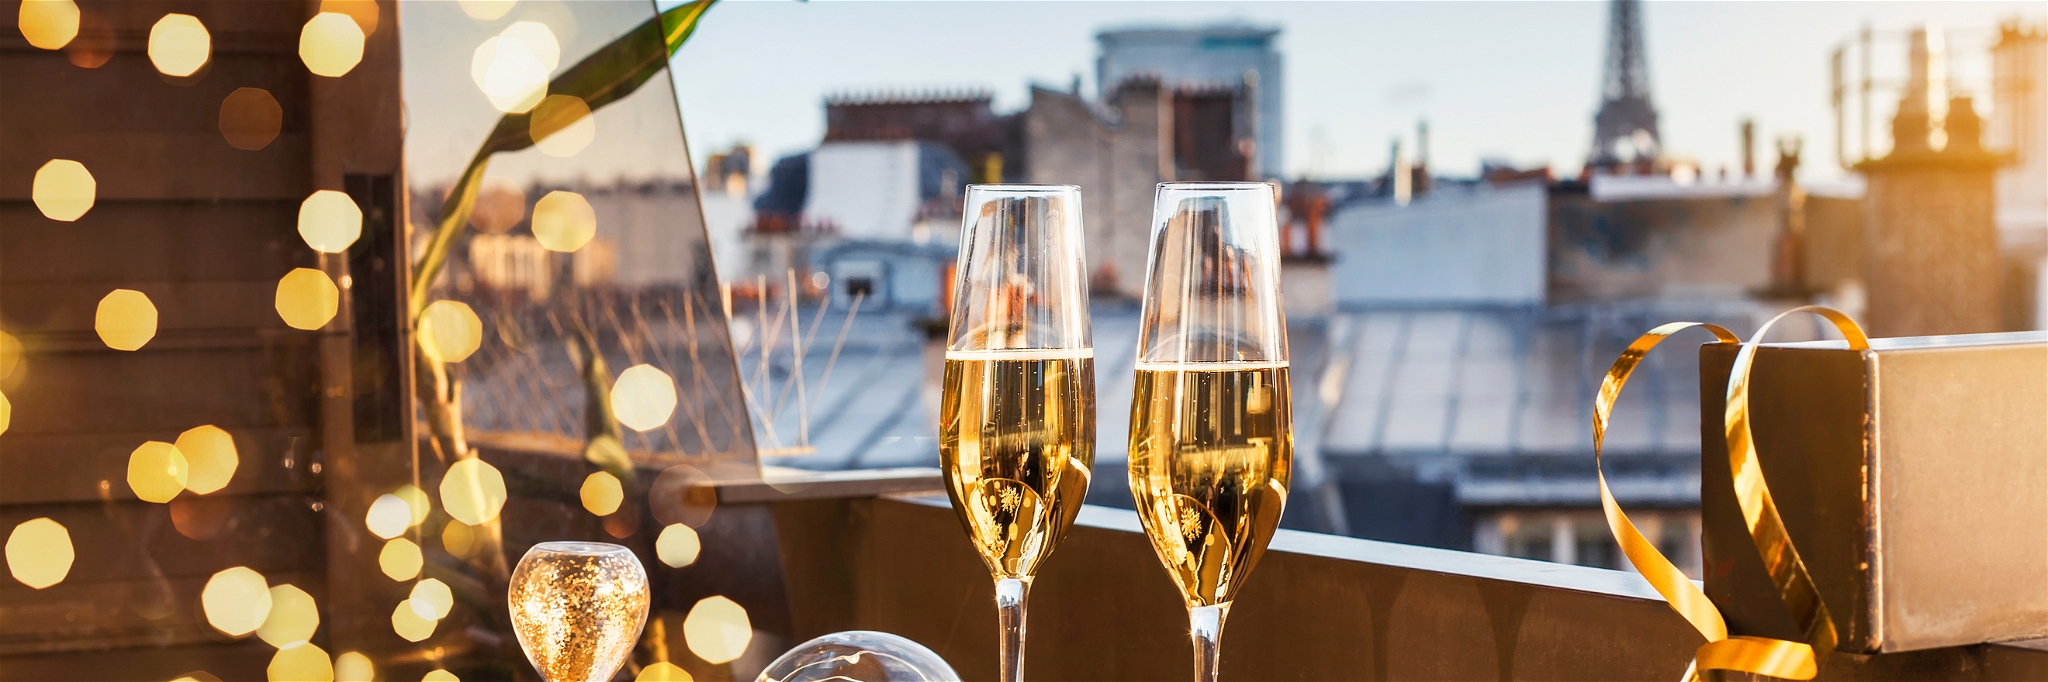 Check in to a fabulous hotel to ring in the New Year in style.